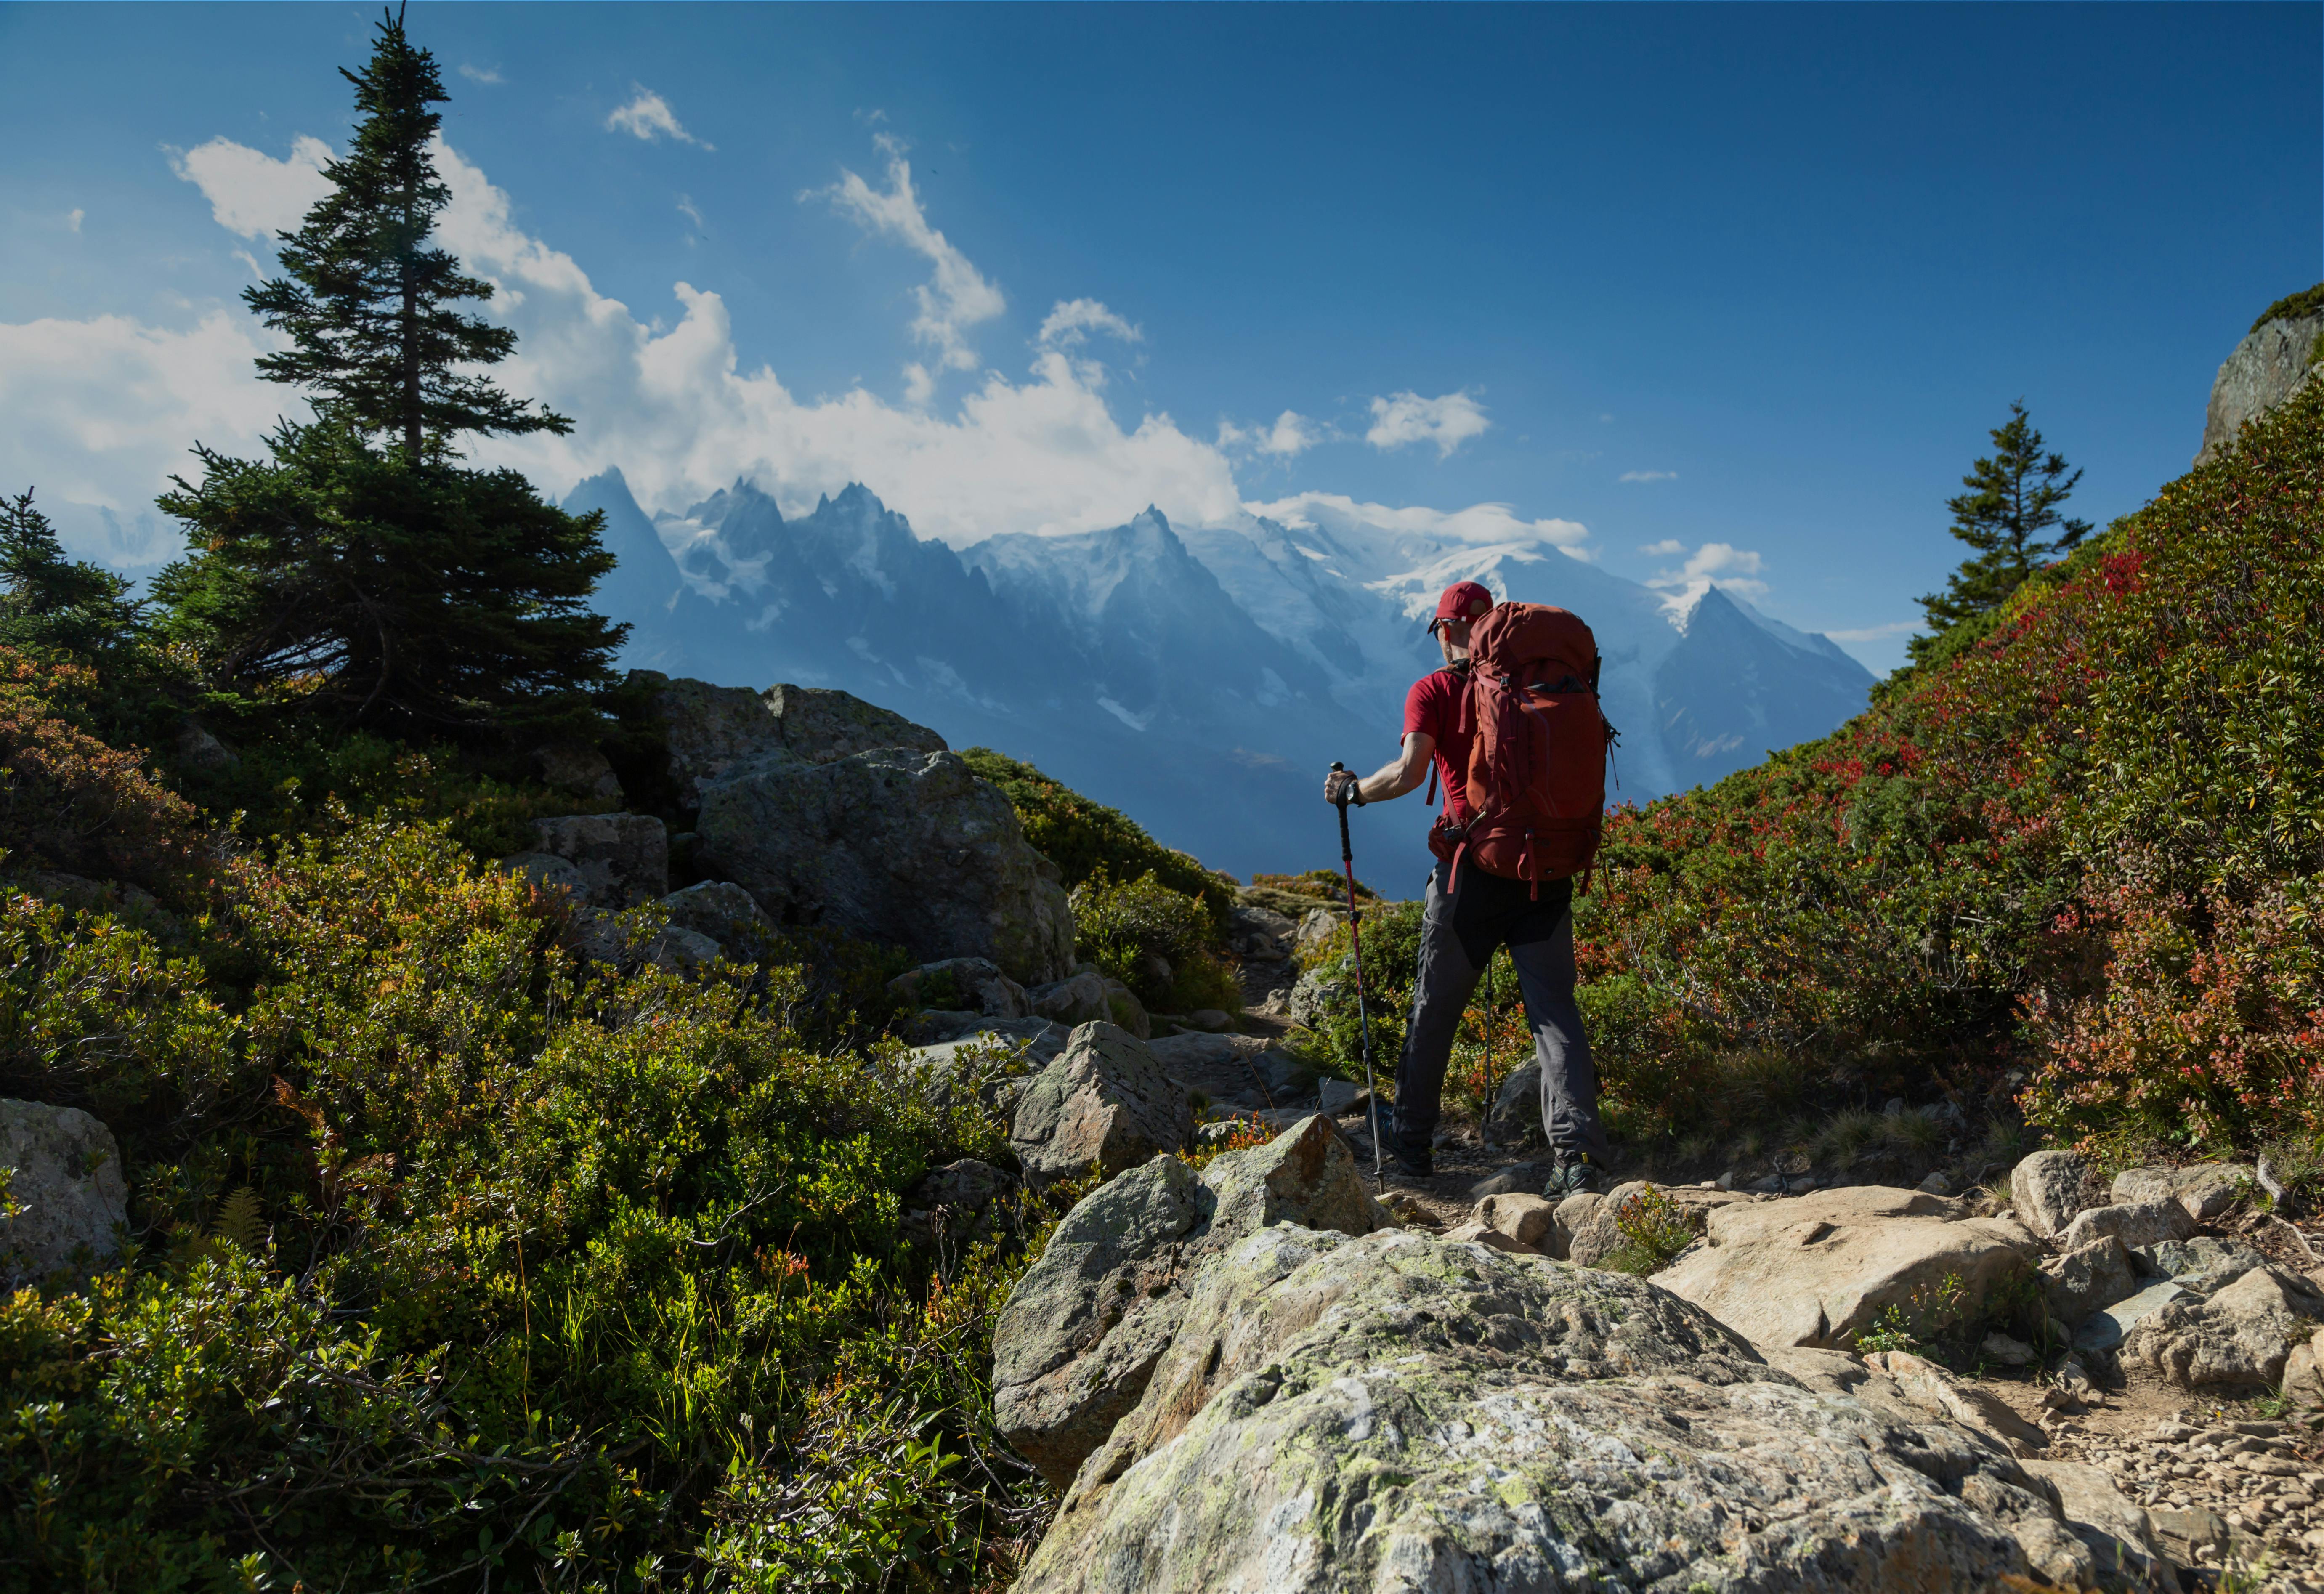 A guy is shown hiking up a rocky hill with hiking poles and a backpack through the mountains